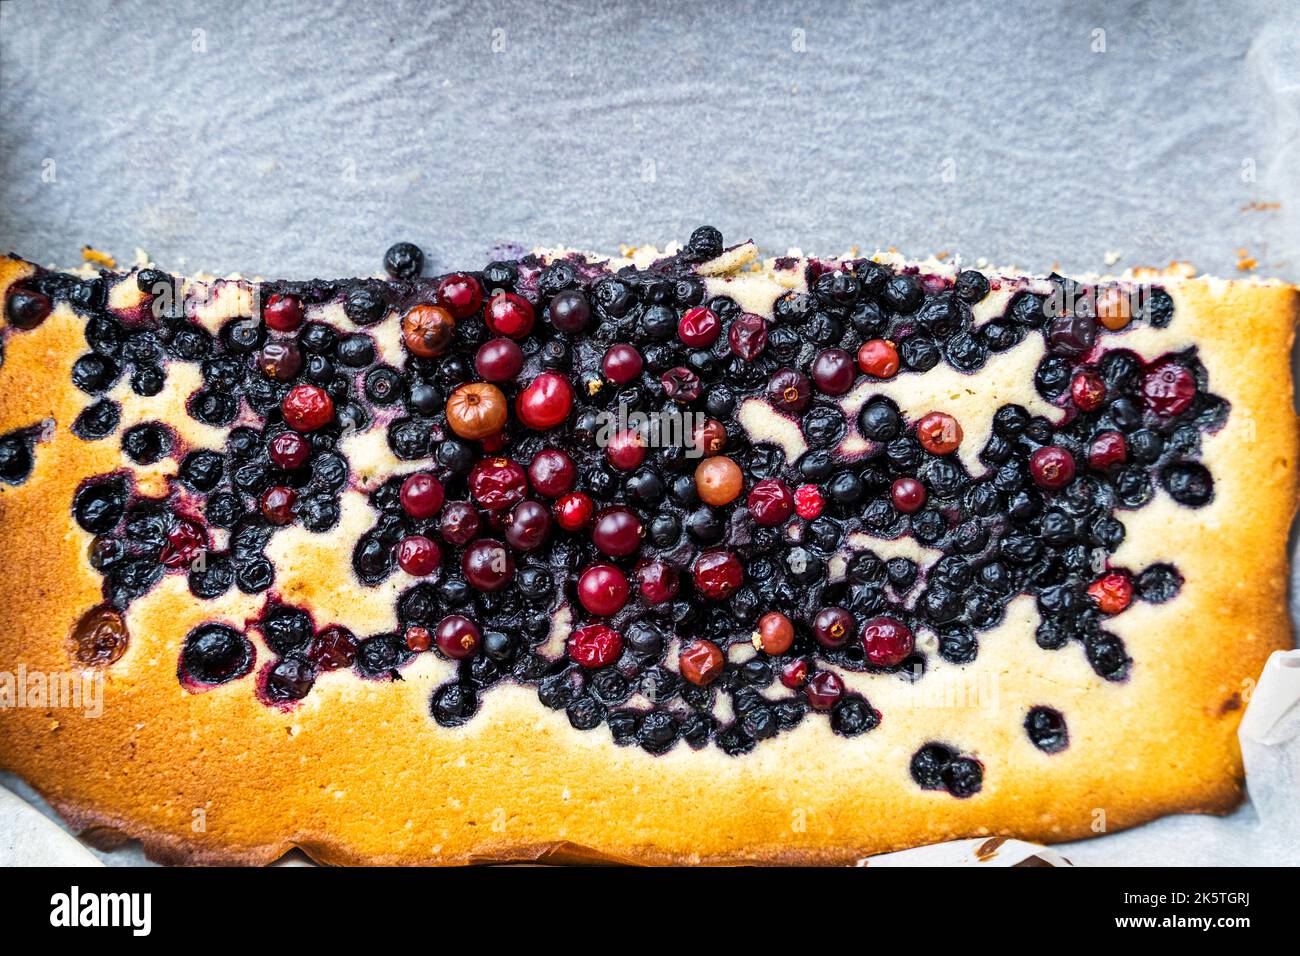 delicious homemade blueberry pie baked with love Stock Photo